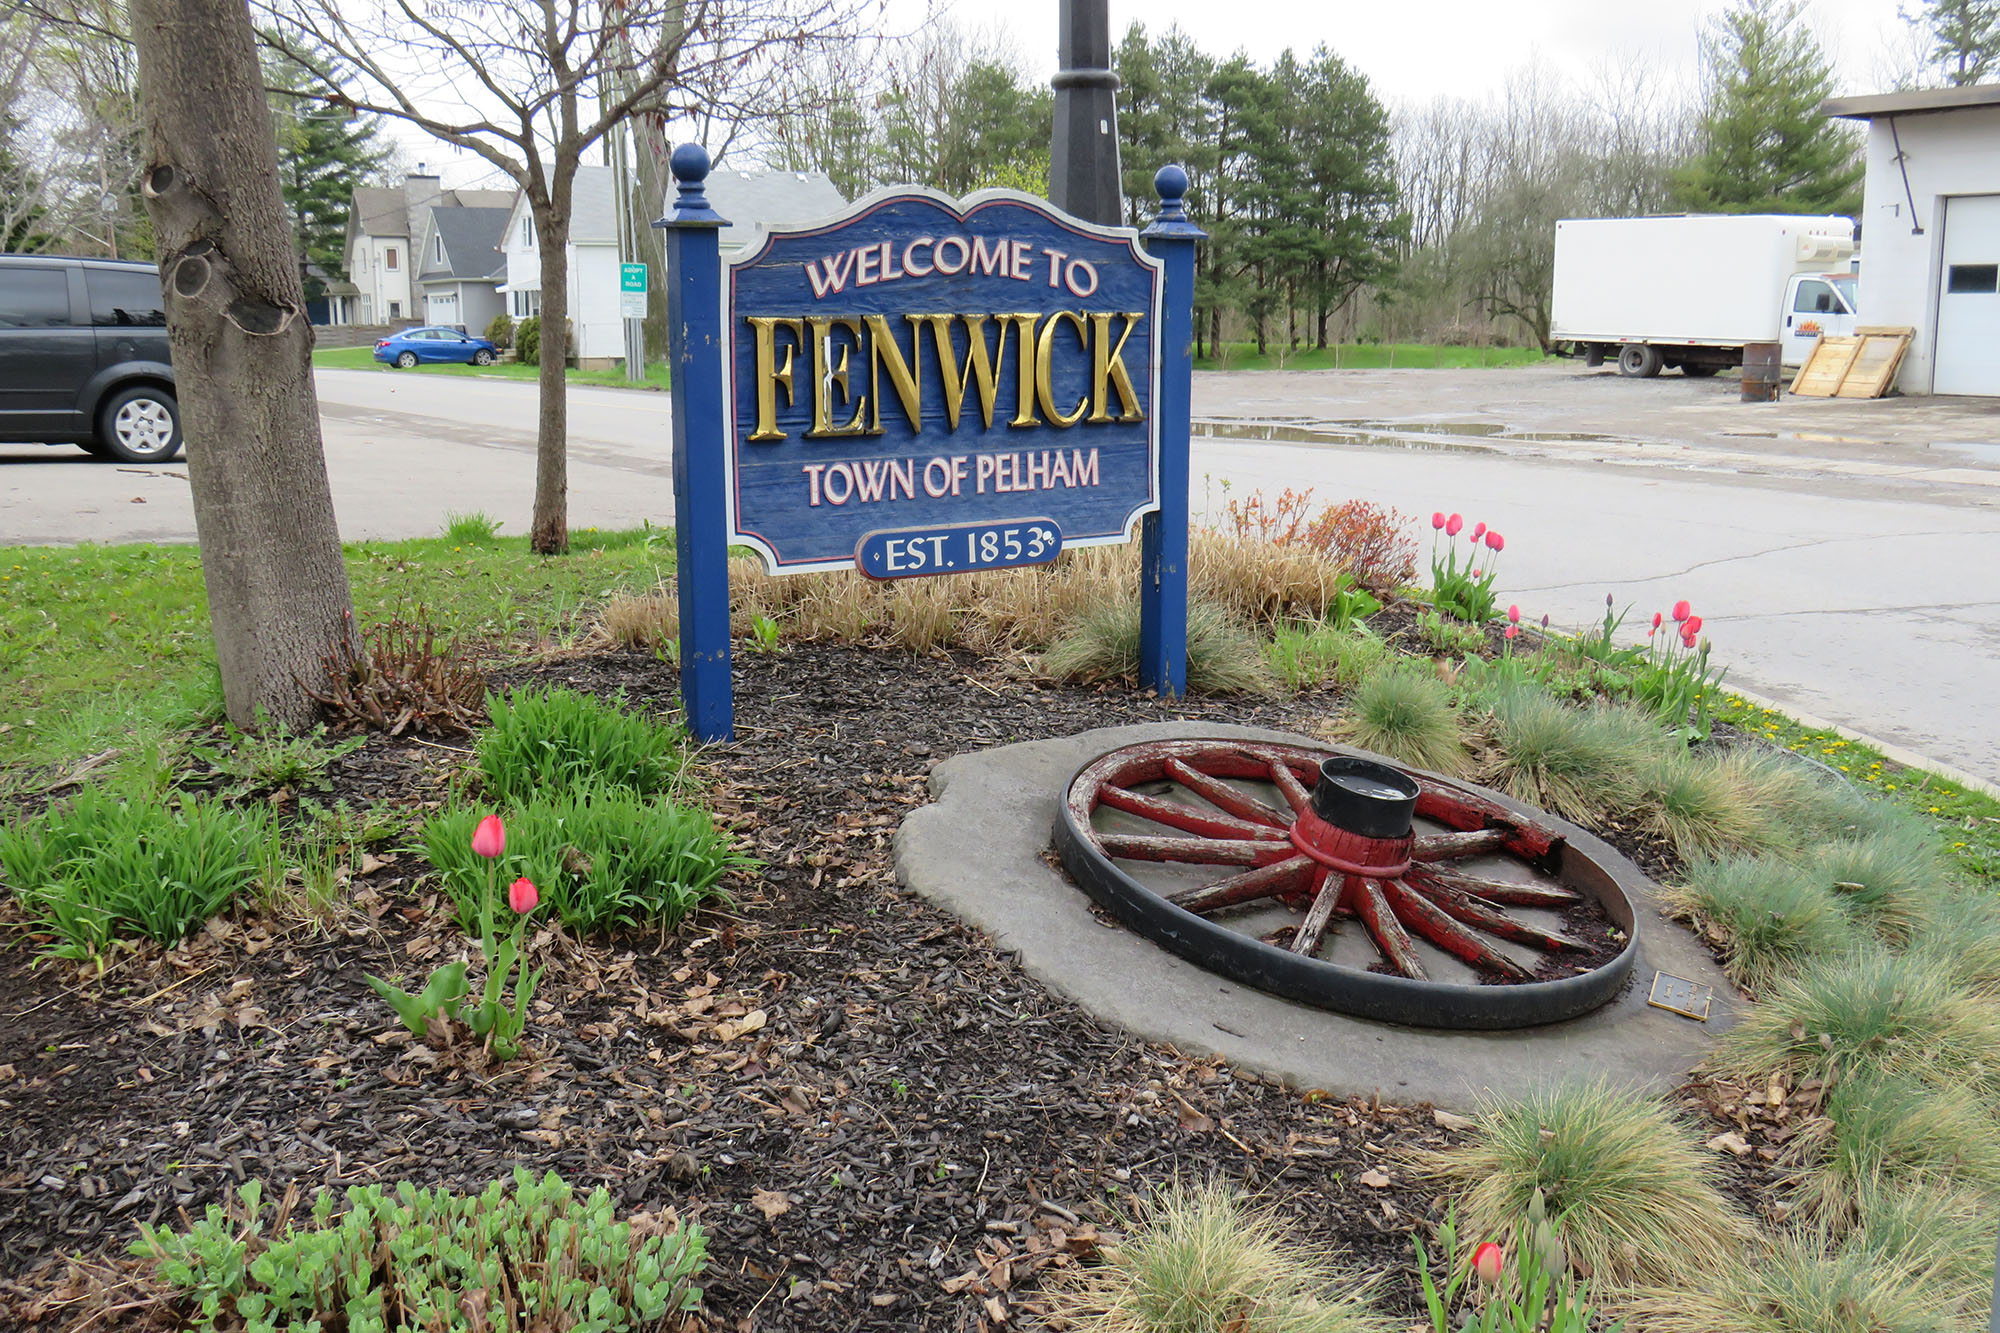 Change in the air: East Fenwick Secondary Plan Open House 